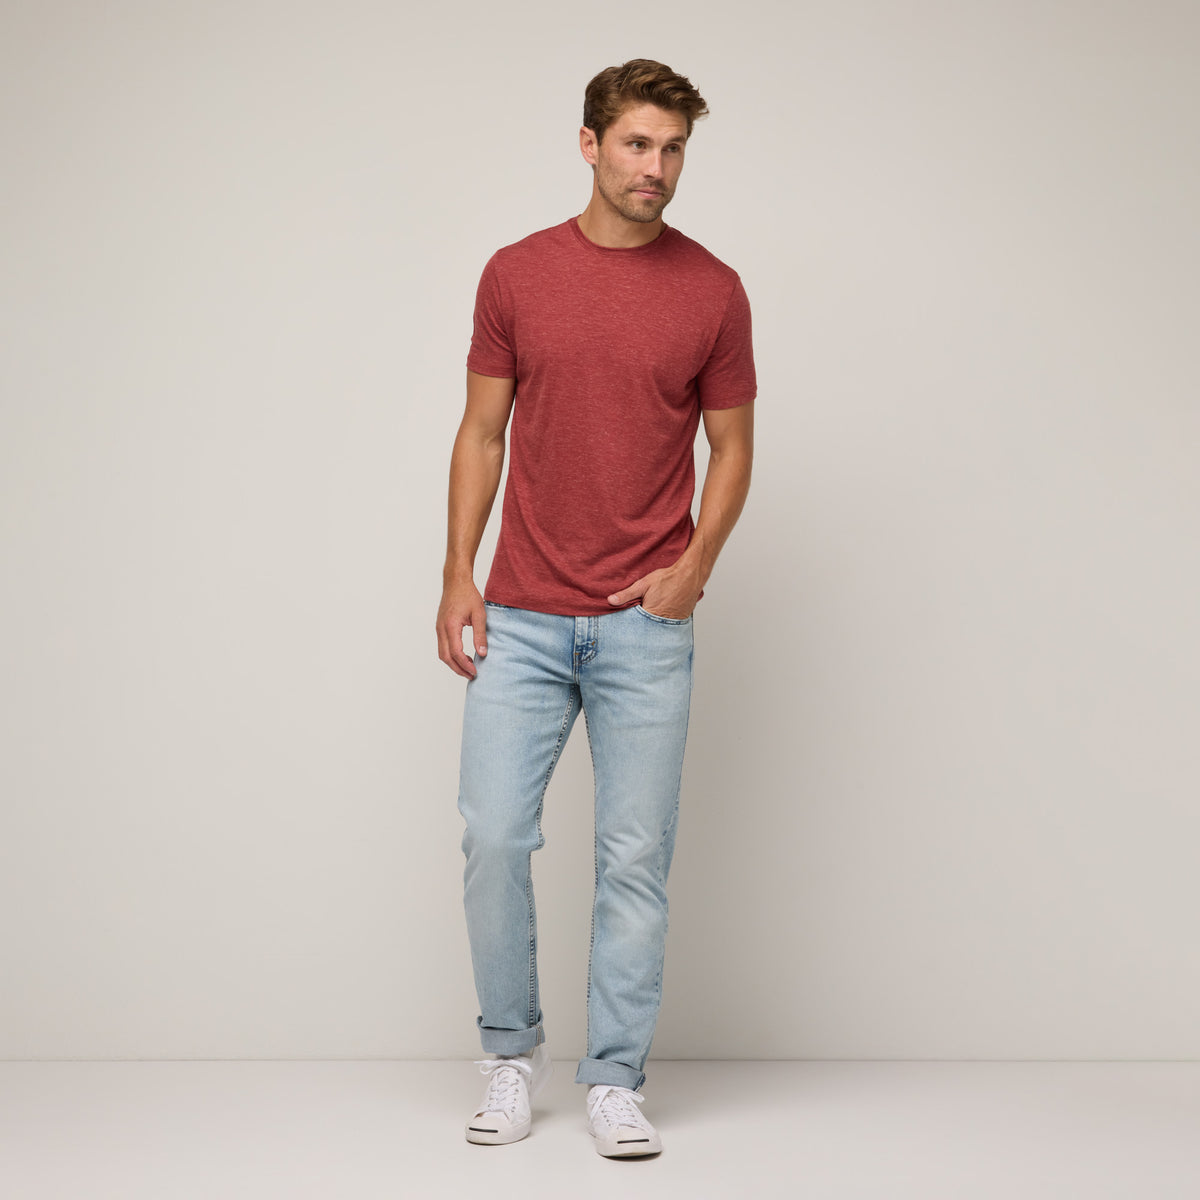 image-on-hover,model-spec:Matt is 6'2", 176 lbs, and wears size M